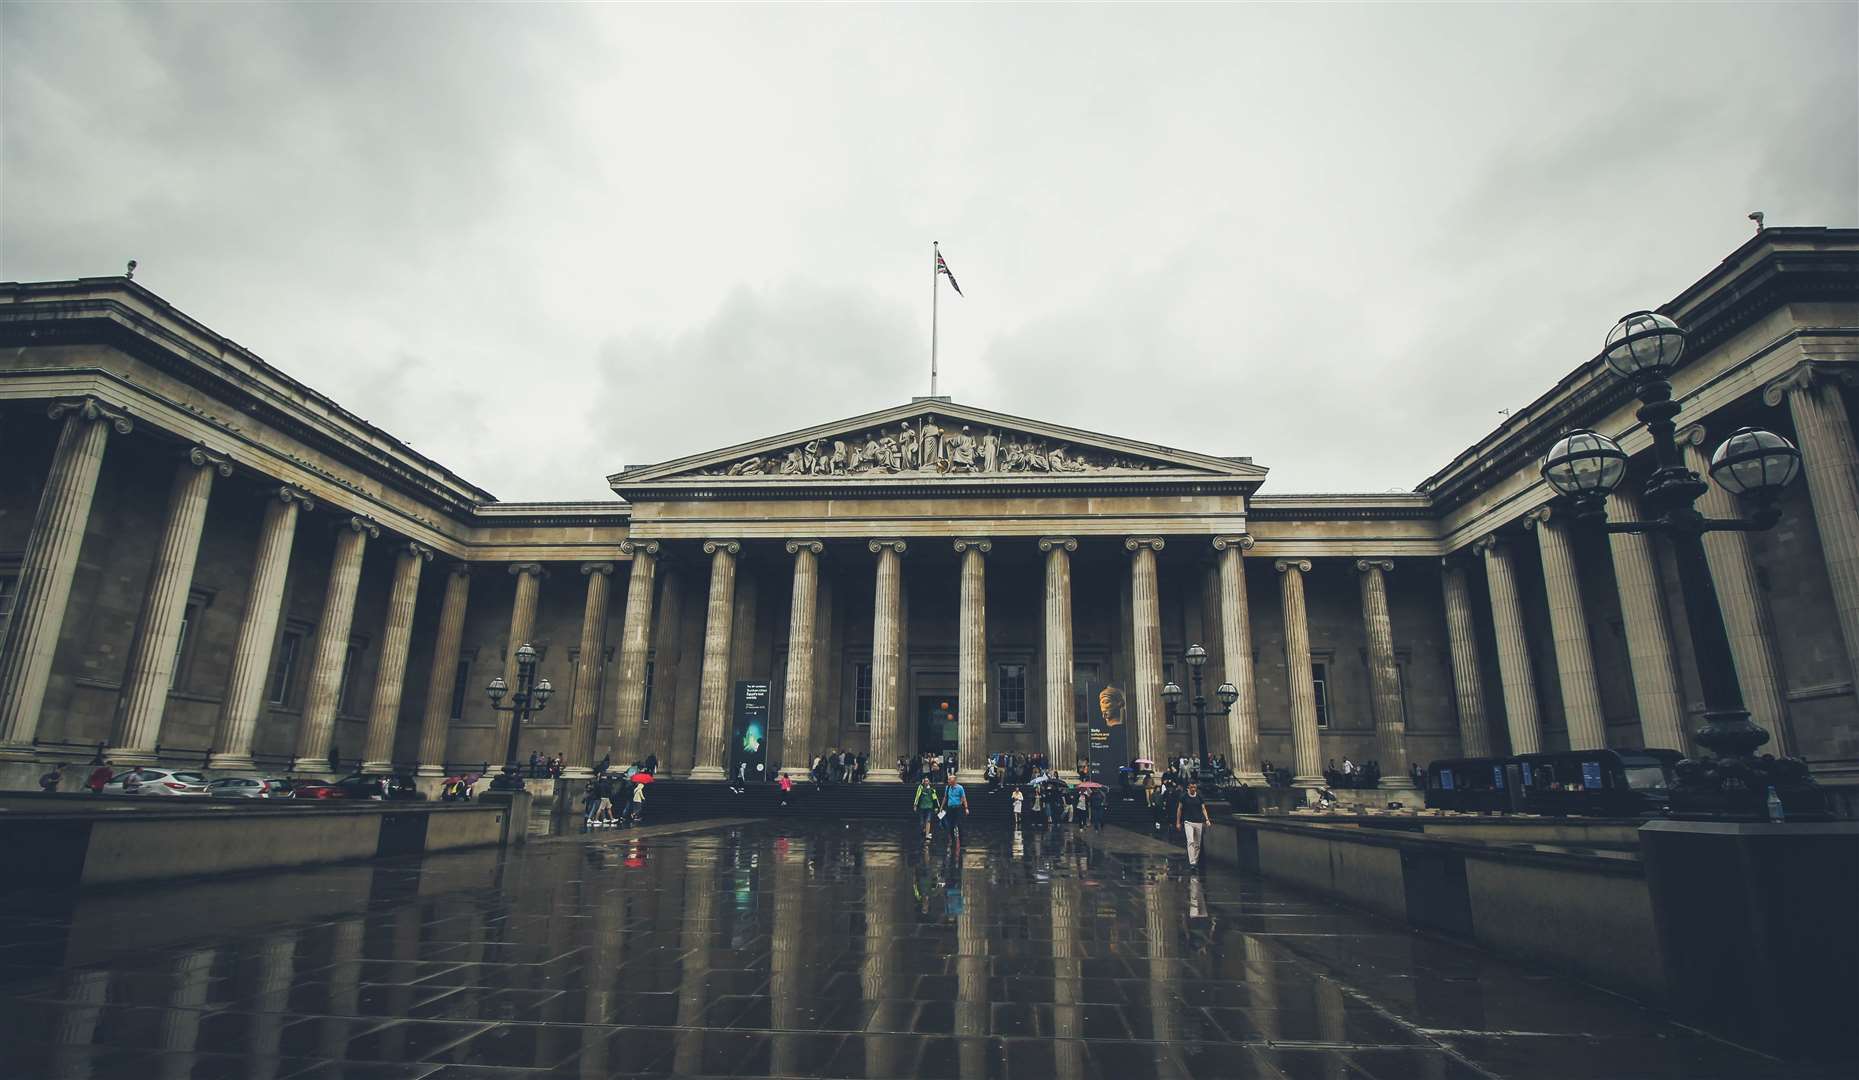 The British Museum in London Picture: Holidu